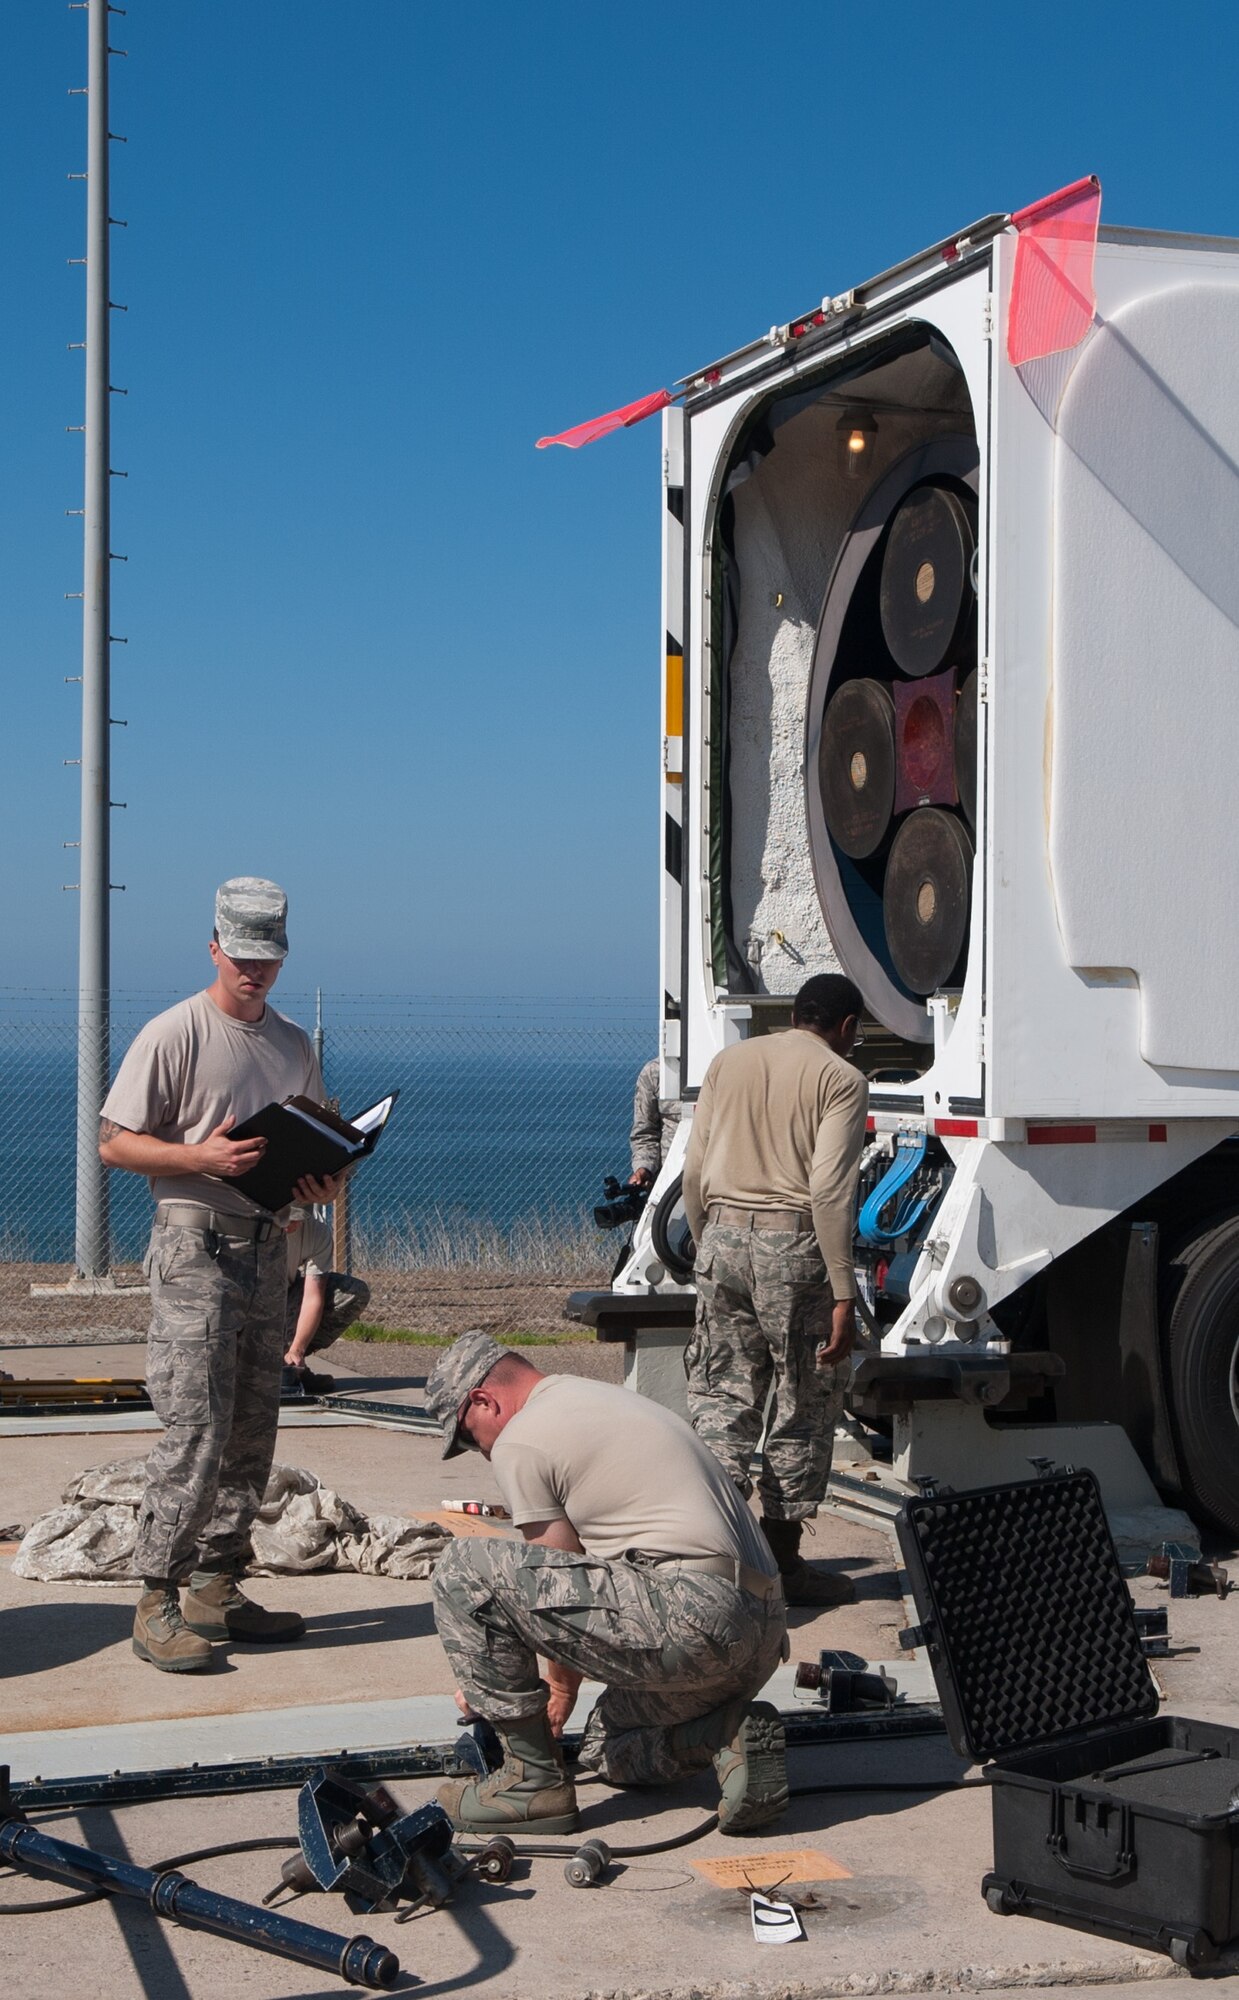 Missile maintenance Airmen prepare to unload a LGM-30G Minuteman III ICBM from a transport vehicle Aug. 26, 2014, at Vandenberg Air Force Base, Calif. A joint team from the 576th Test Squadron at Vandenberg AFB and the 91st Missile Squadron at Minot AFB, N.D., launched the missile Sept. 23, 2014, showcasing the capabilities of the Air Force’s ground-based leg of the nation’s nuclear triad. (U.S. Air Force courtesy photo)